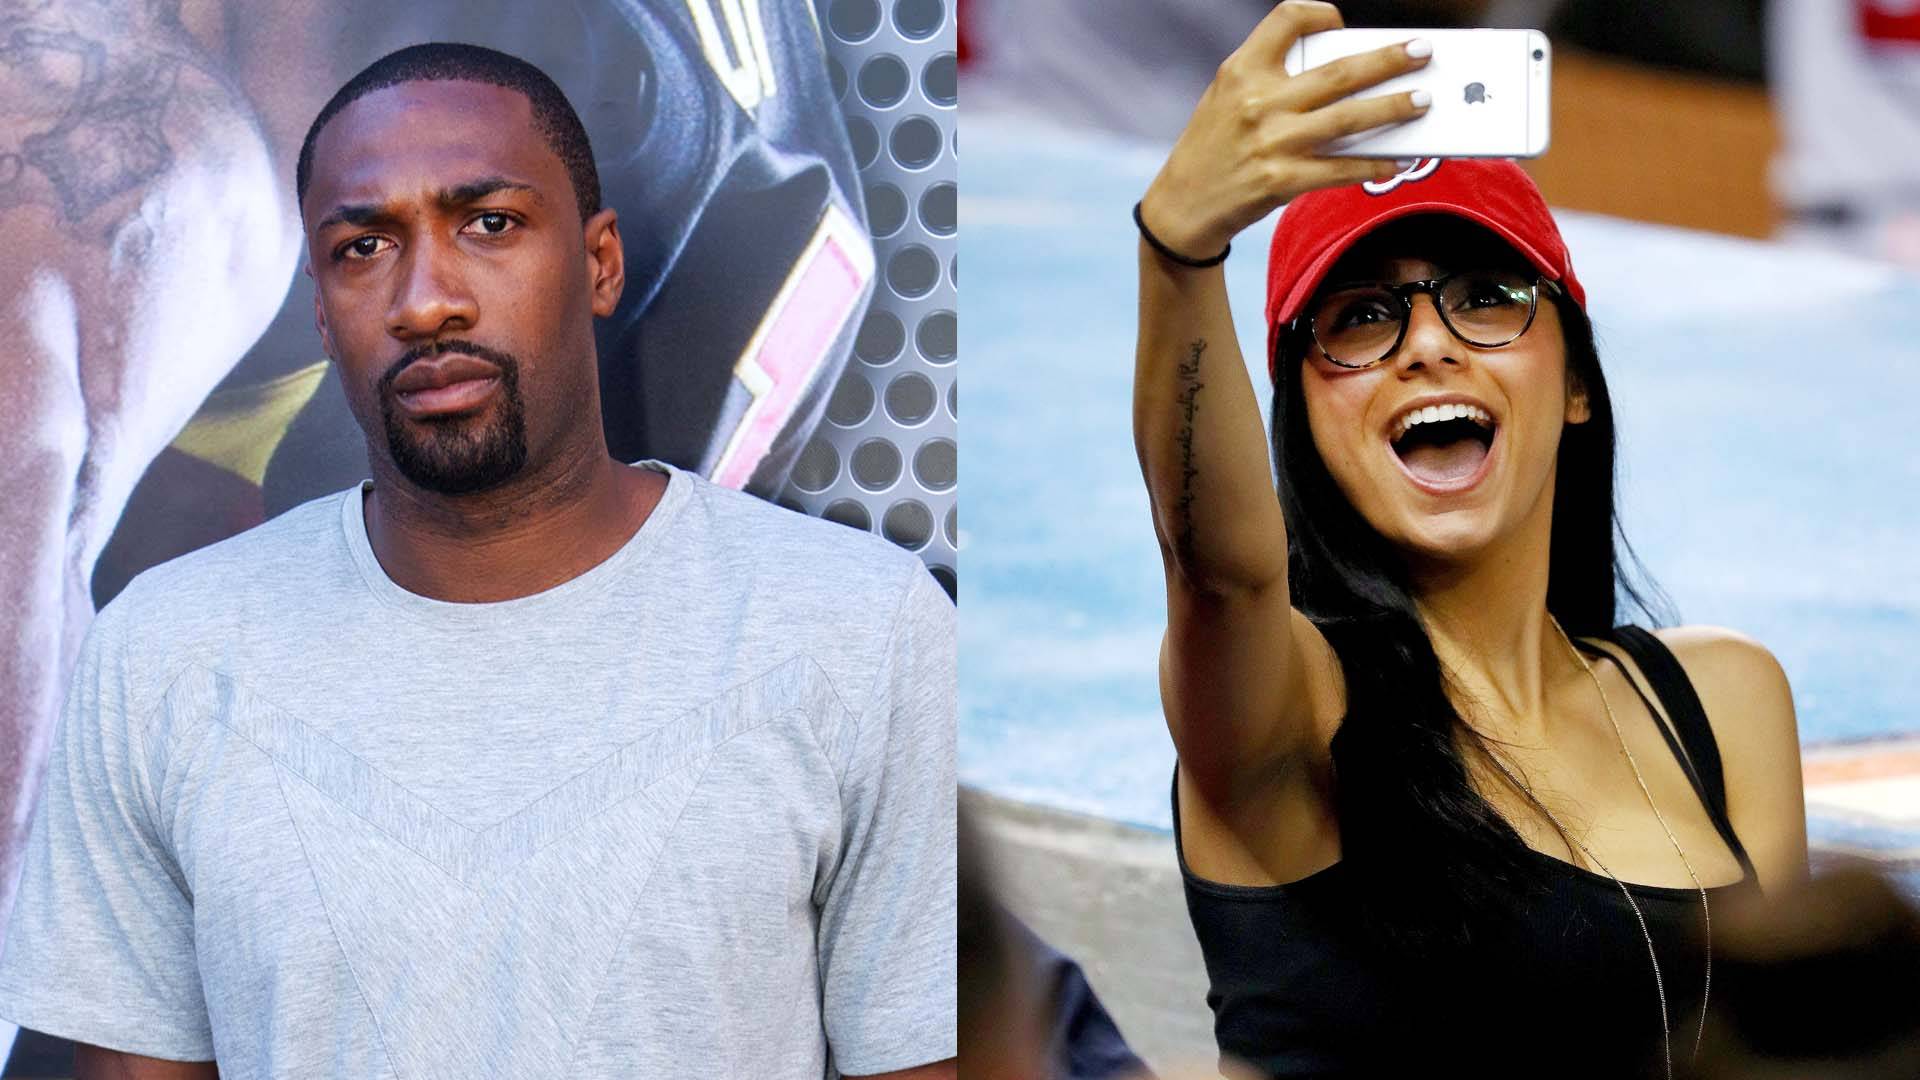 Raap Seelpack Xxx 1st Time - Gilbert Arenas Exposed The Hell Out Of Porn Star Mia Khalifa For Trying To  Slide In His DM 'For The D' | News | BET